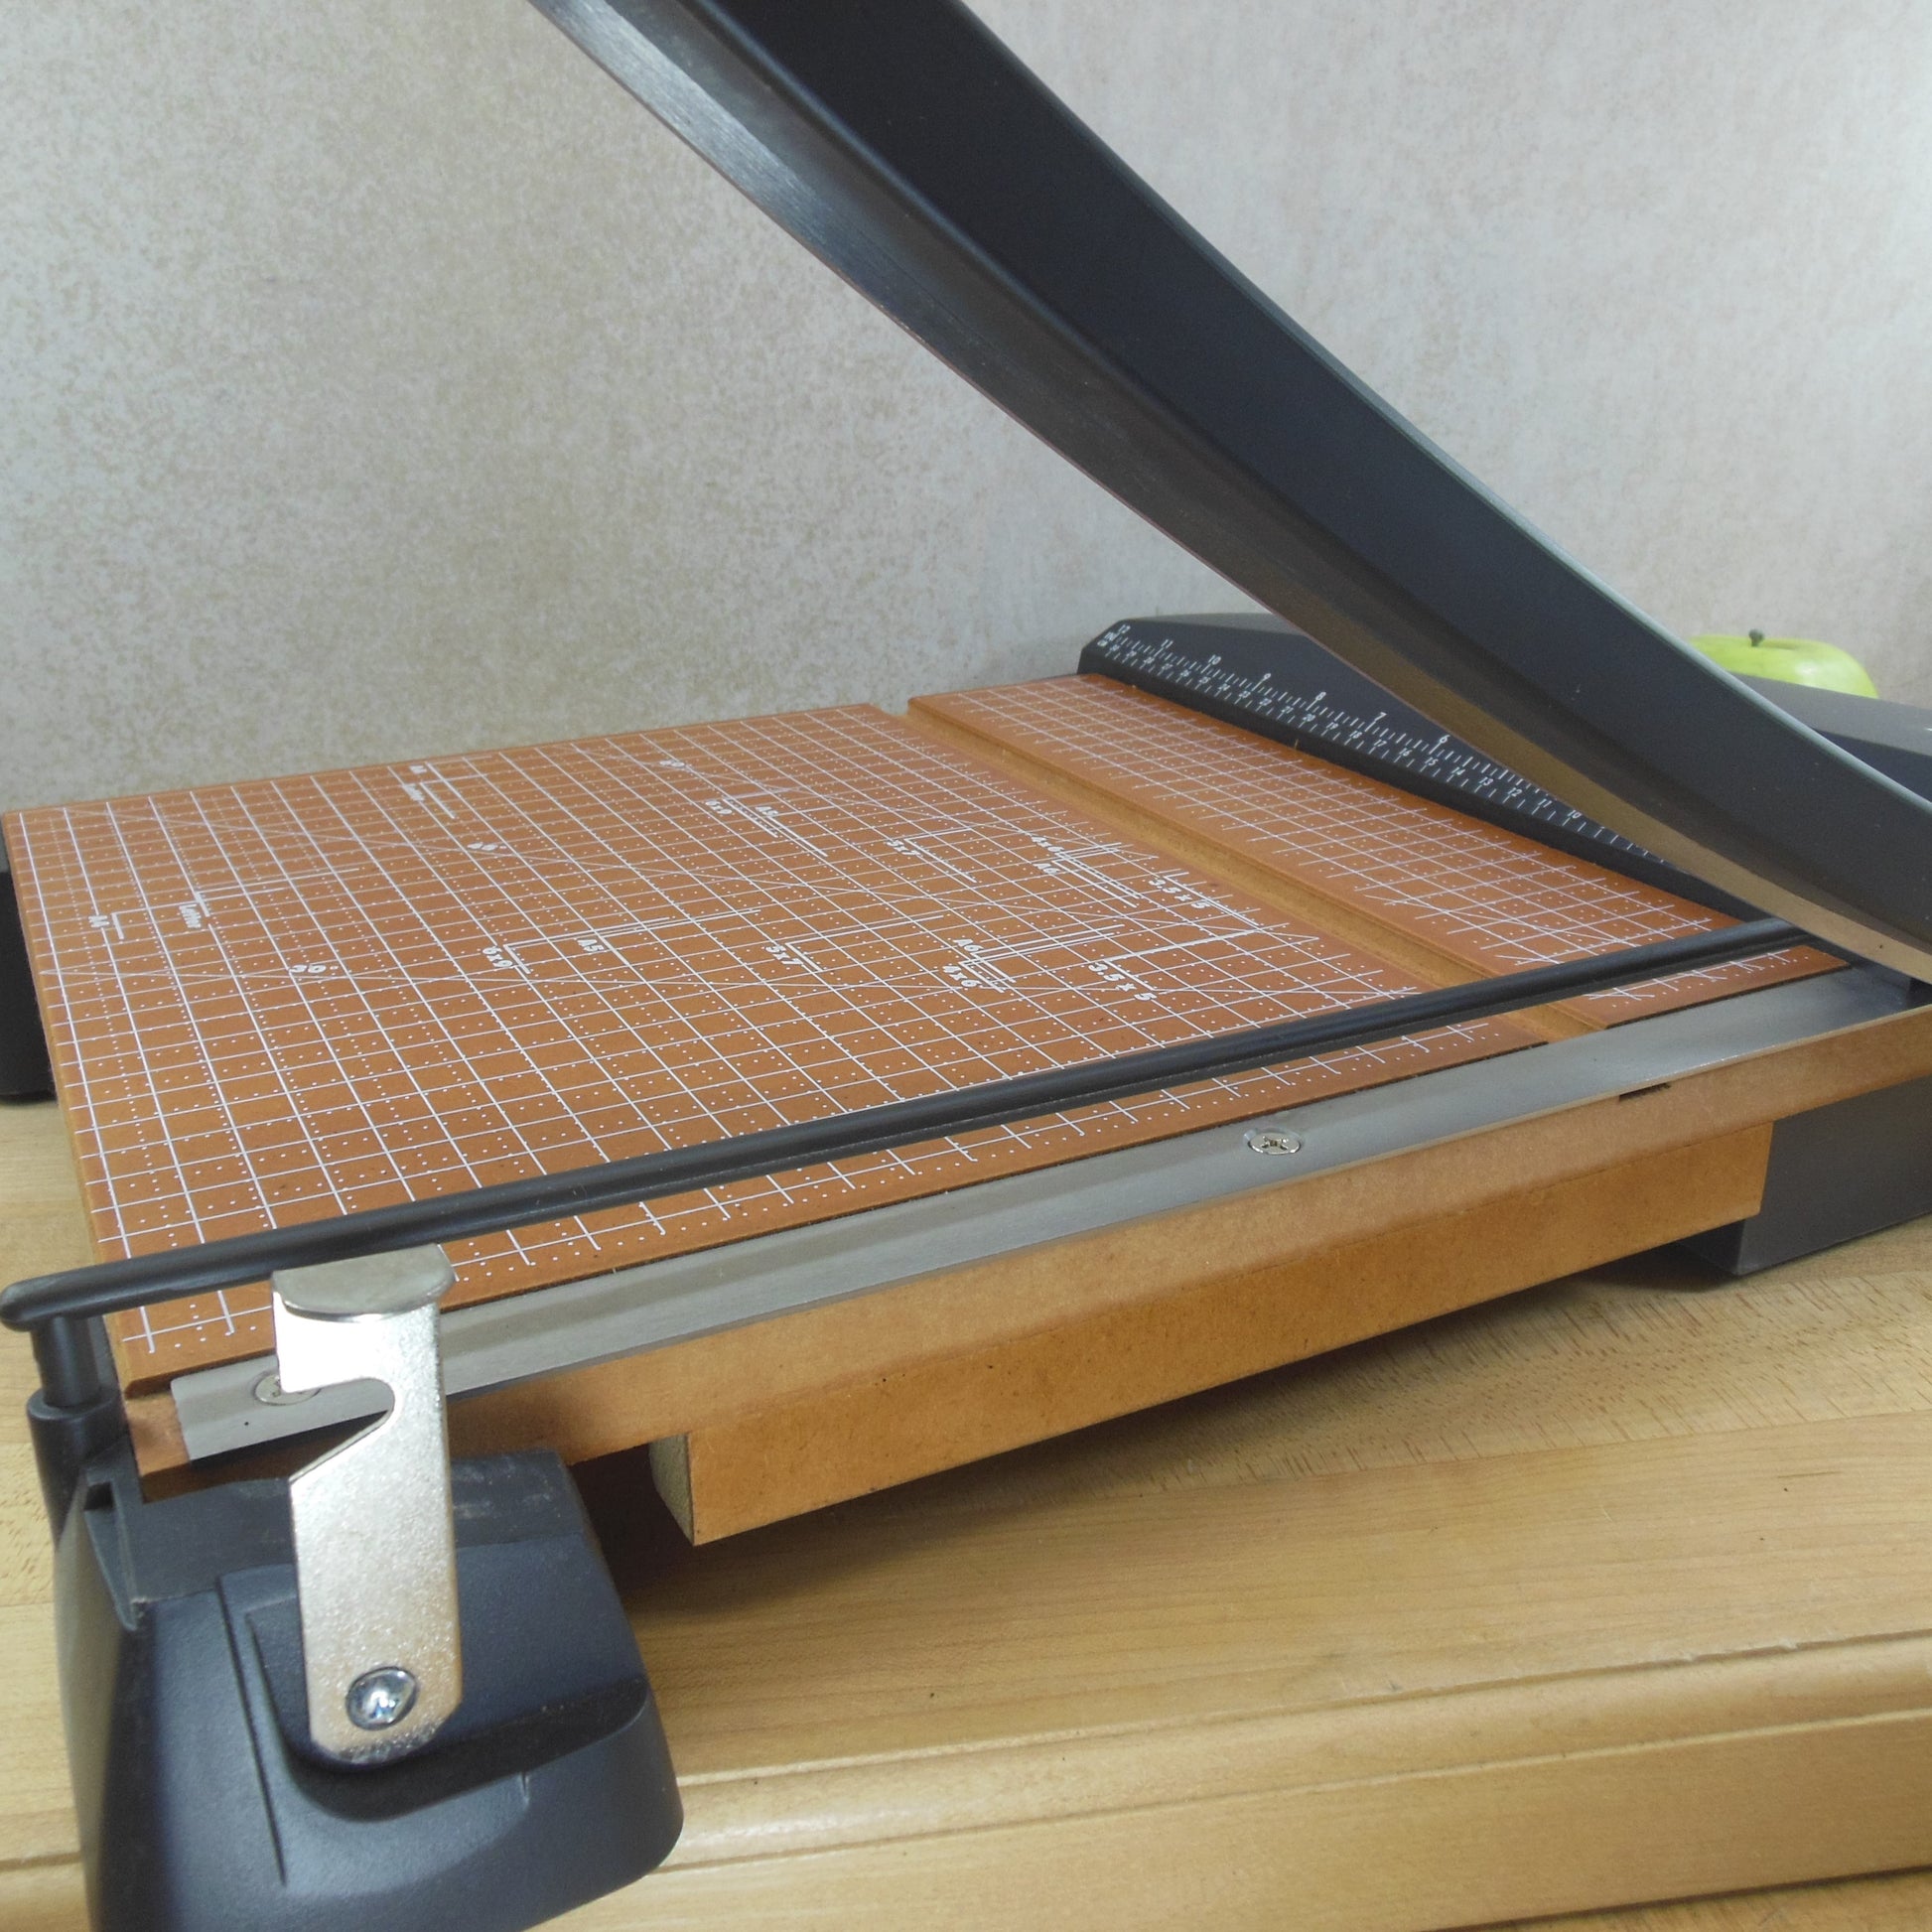 X-ACTO 12 Guillotine Paper Cutter Trimmer 26312 – Olde Kitchen & Home